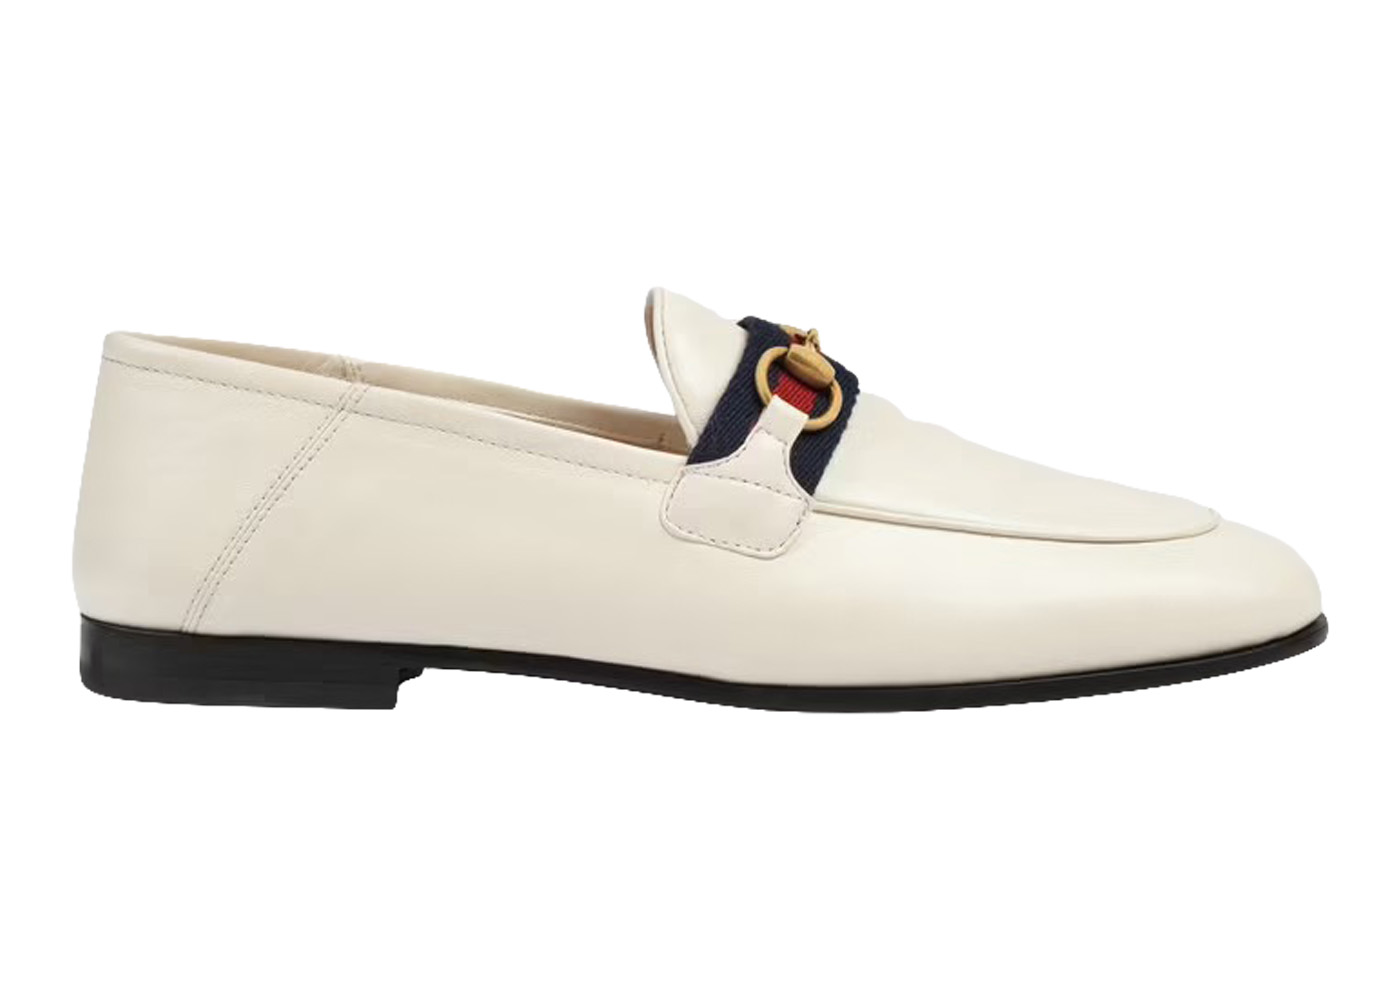 Gucci Slip On Loafer with Web White Leather